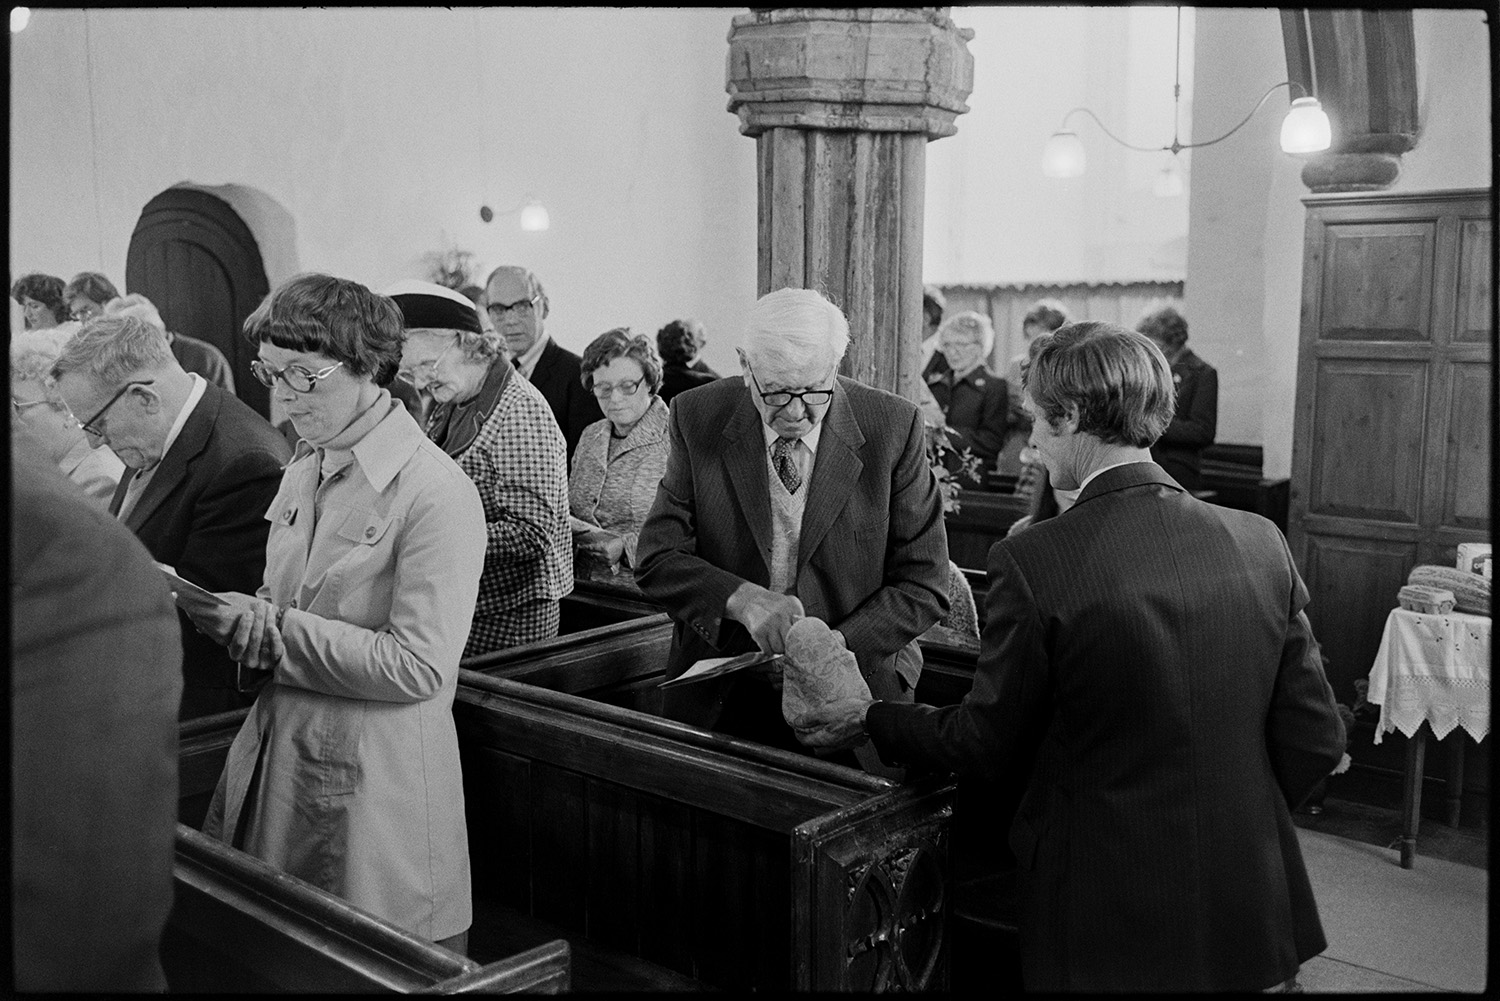 People in church singing hymns.
[Men and women standing in wooden pews in the Church of St. Peter, Dowland, singing hymns at the Harvest Festival. One man in the congregation is putting money into a collection bag being held out by another man. One of the church pillars and a wood carving on the end of a pew can be seen.]